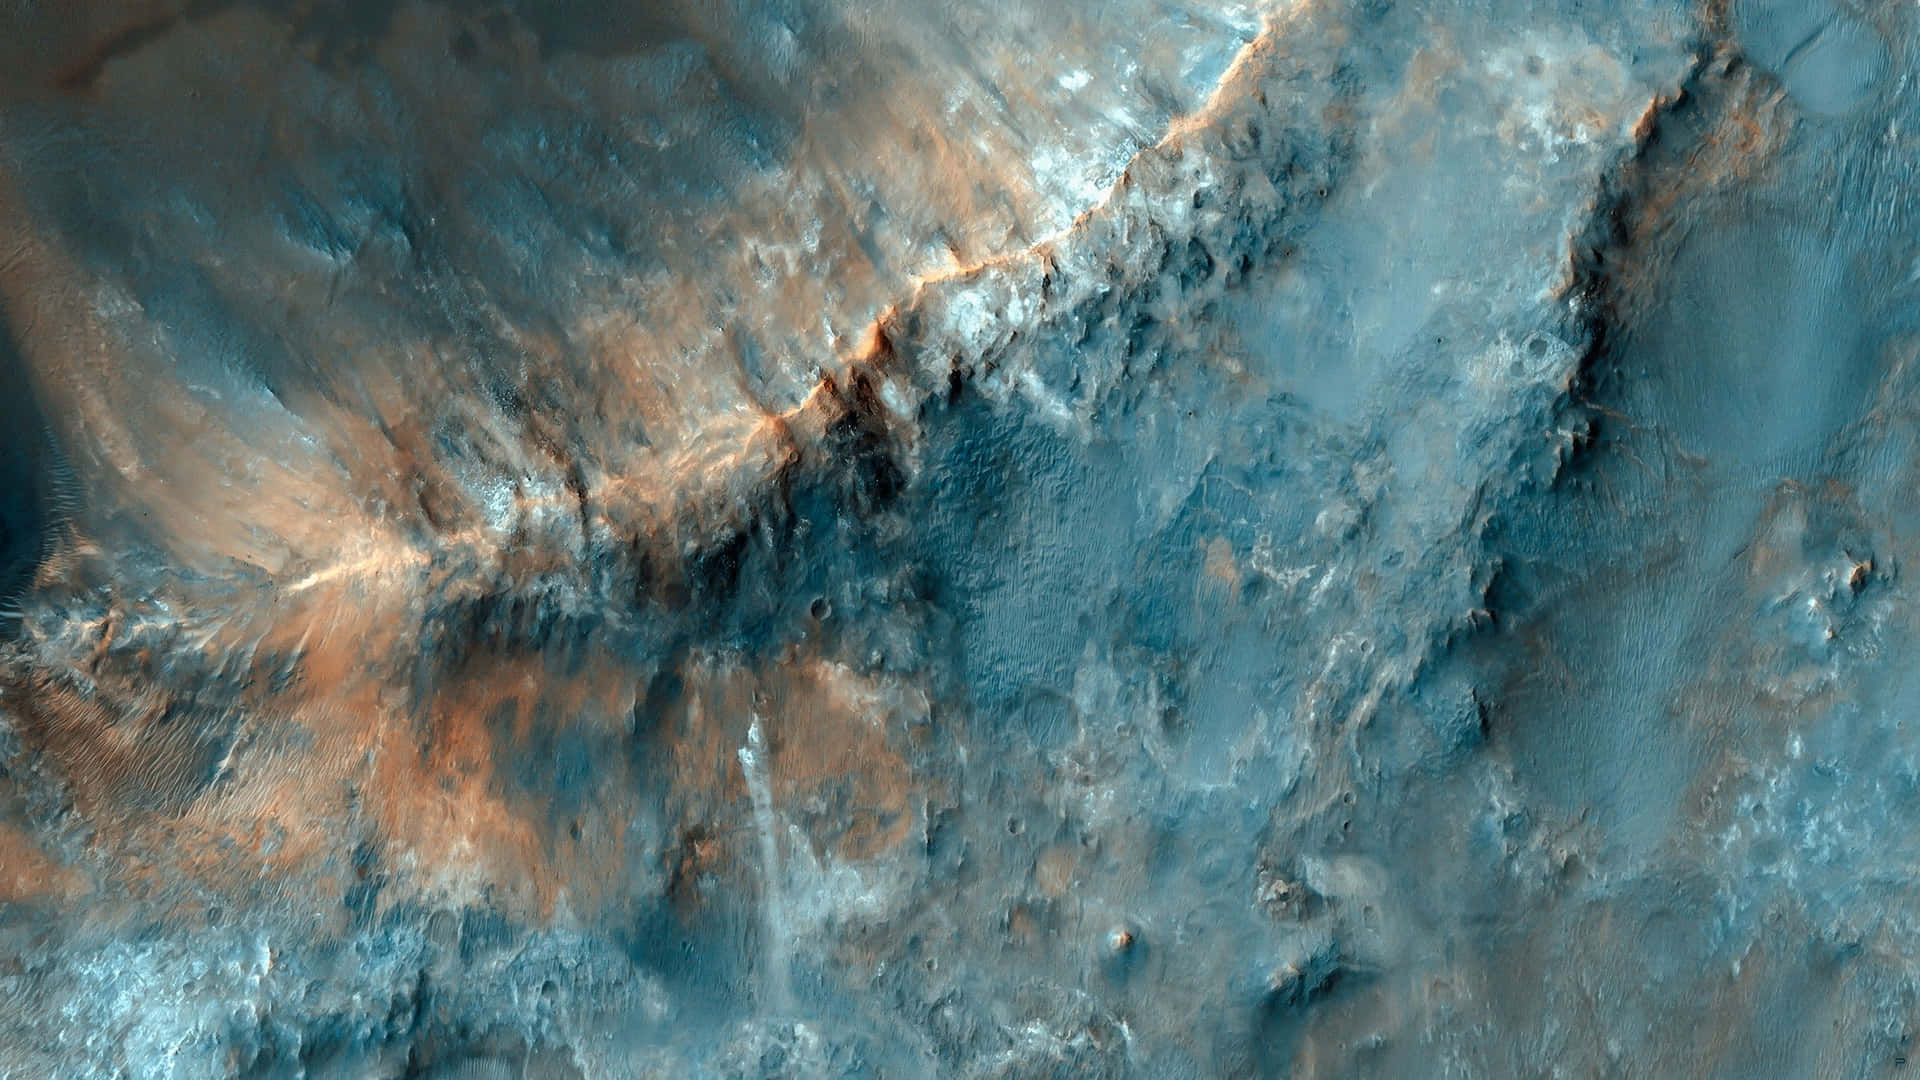 Marsnasa - Mars - Nasa Would Be Translated To: Mars - Nasa - Mars - Nasa (since There Is No Linguistic Context To Provide Any Further Meaning Related To Computer Or Mobile Wallpaper) Wallpaper